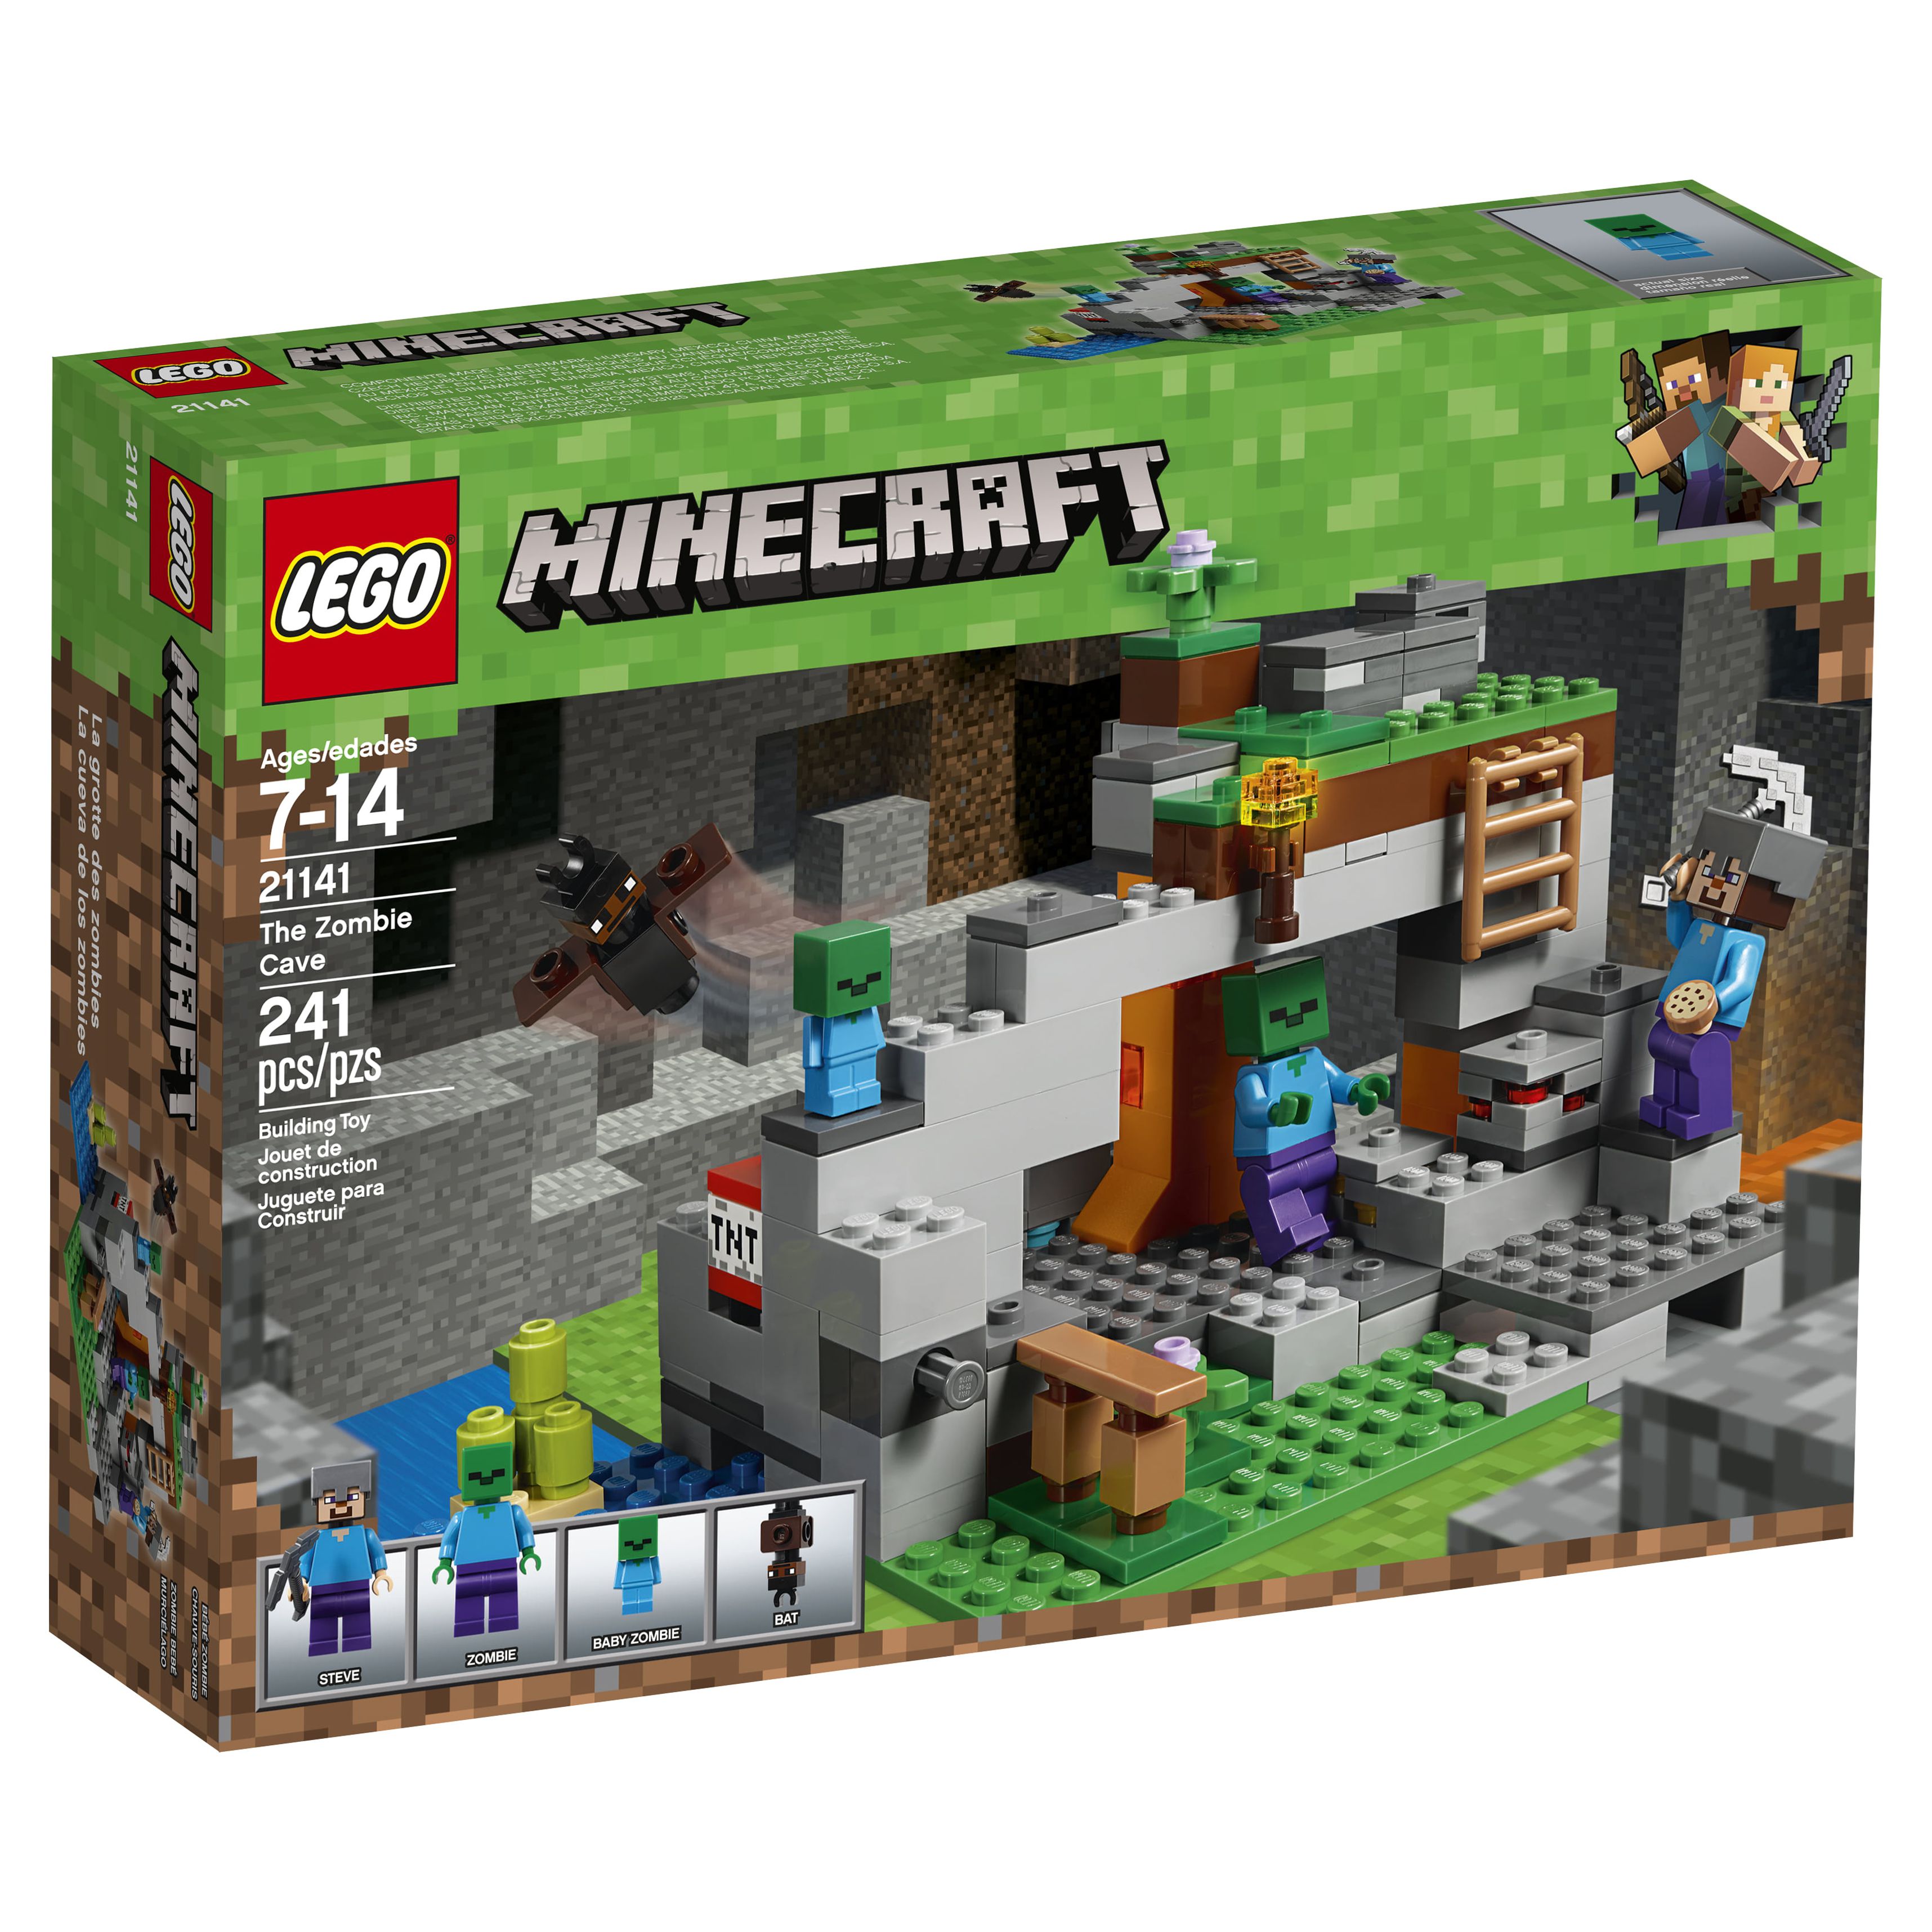 LEGO Minecraft The Zombie Cave 21141 Building Kit for Creative Play - image 4 of 7